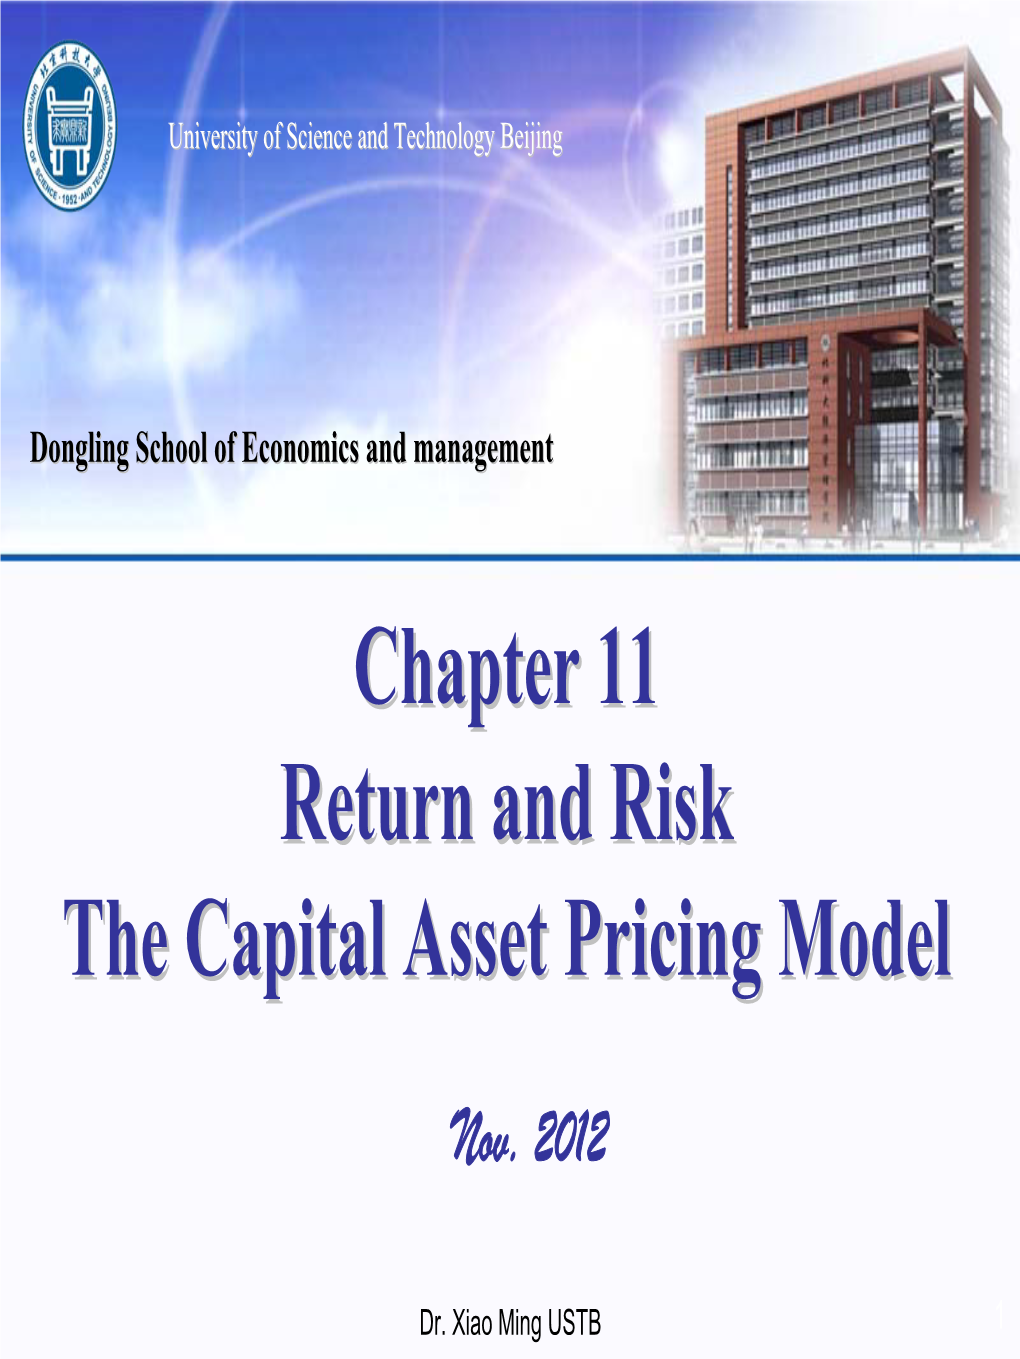 Chapter 11 Return and Risk the Capital Asset Pricing Model.Pdf